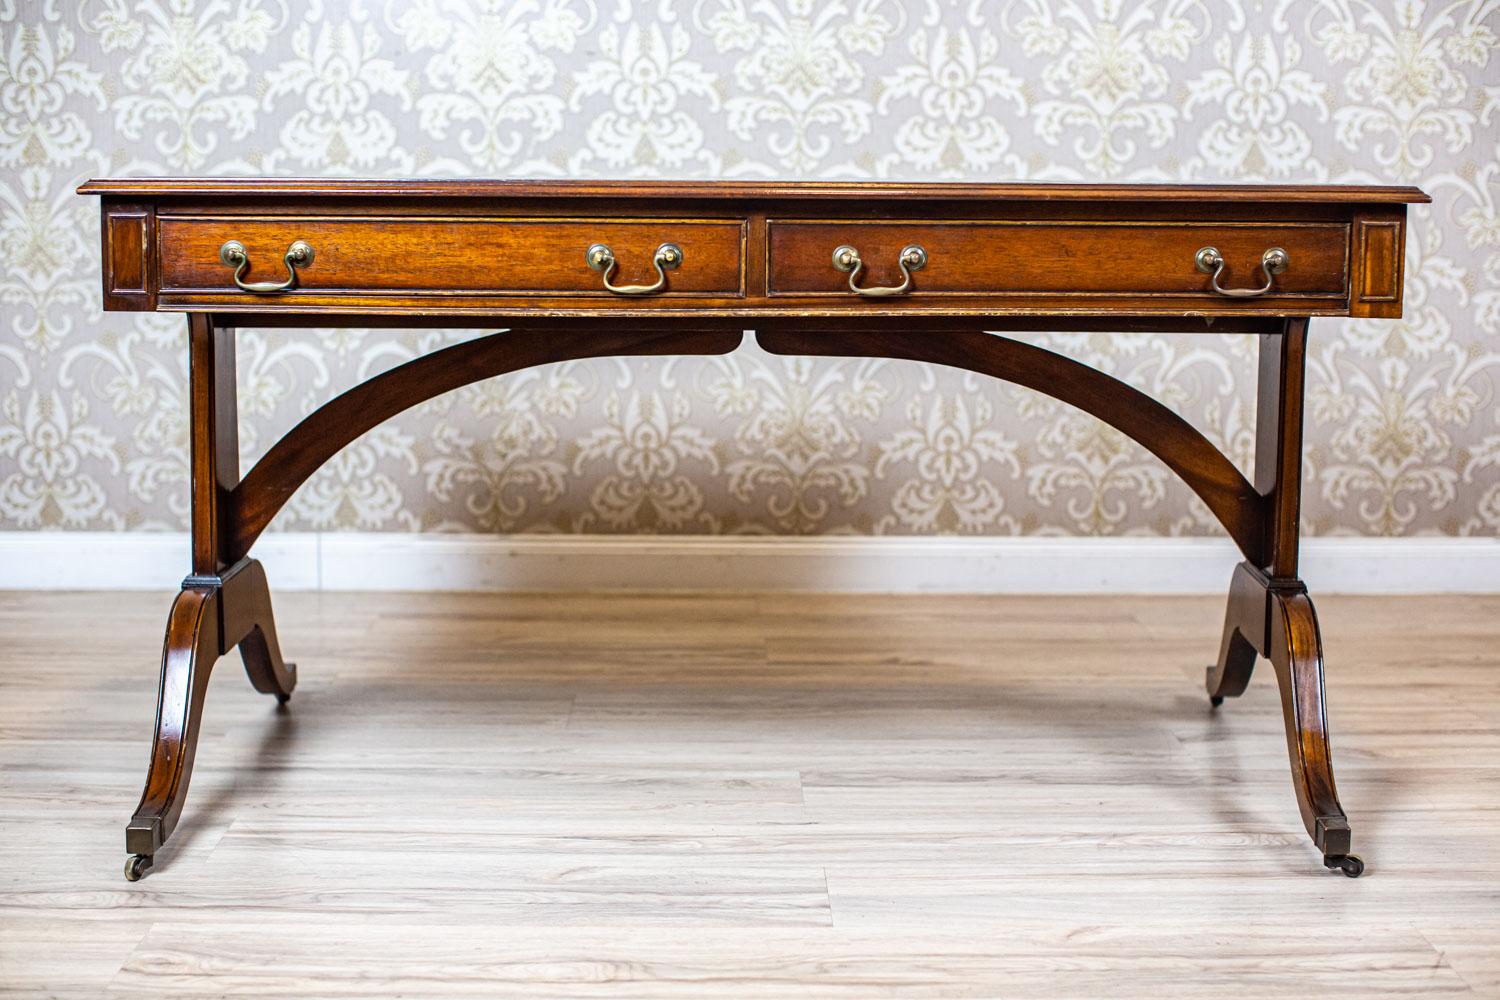 Mid-20th century mahogany desk in the English style

The desk top is wide, comfortable, and lined with leather. It hides two deep drawers, which help to optimize the work.
The desk legs are finished with metal rolls, so it is easier to move the